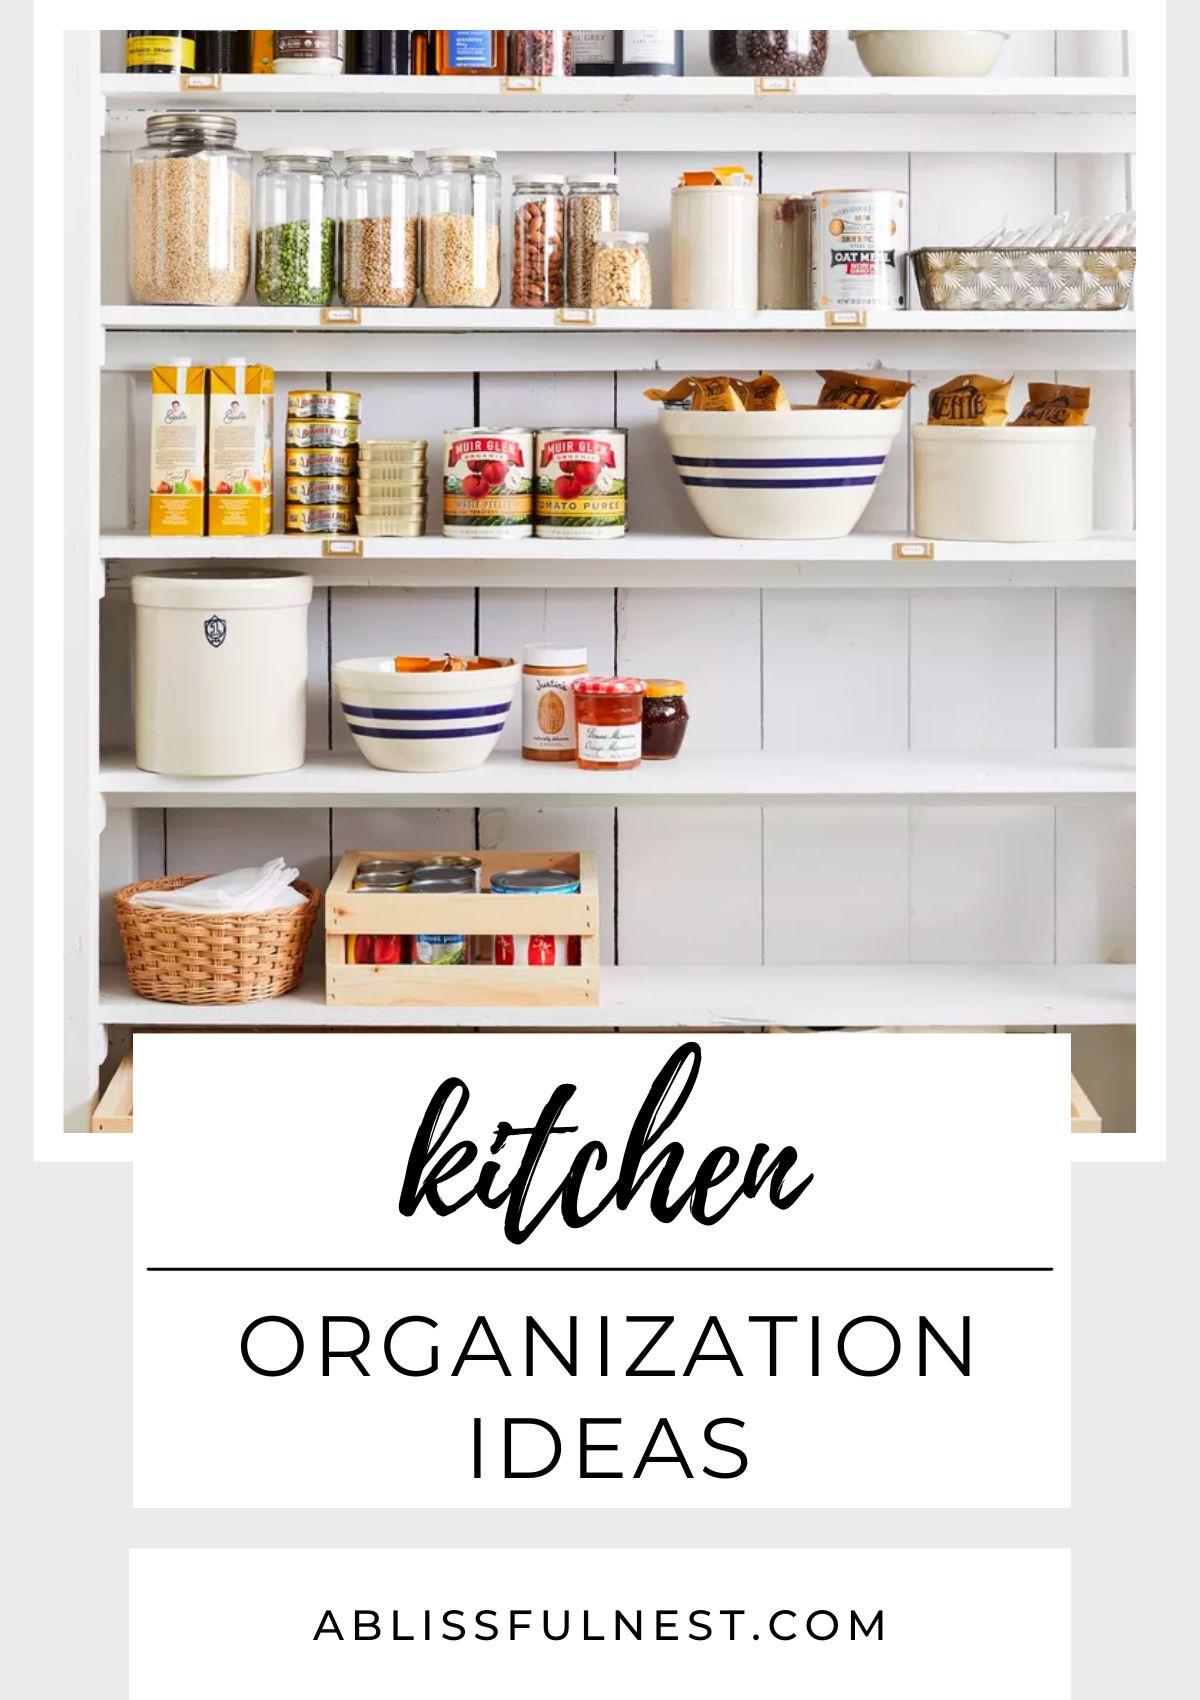 glass drawers and bowls keep ingredients organized on these shelves in a pantry